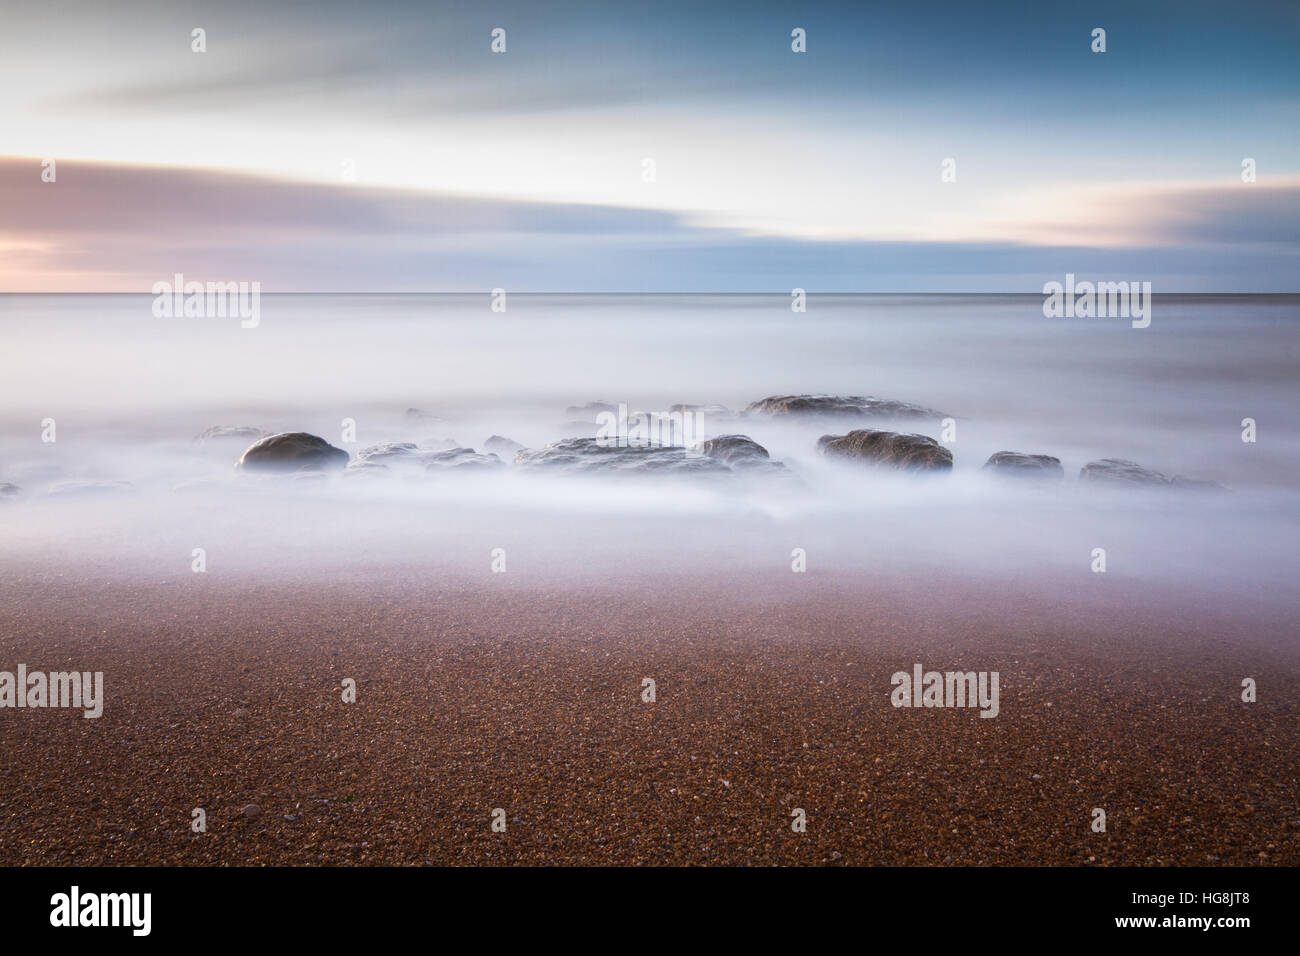 Rocks on the beach being submerged by the incoming tide during sunset Stock Photo